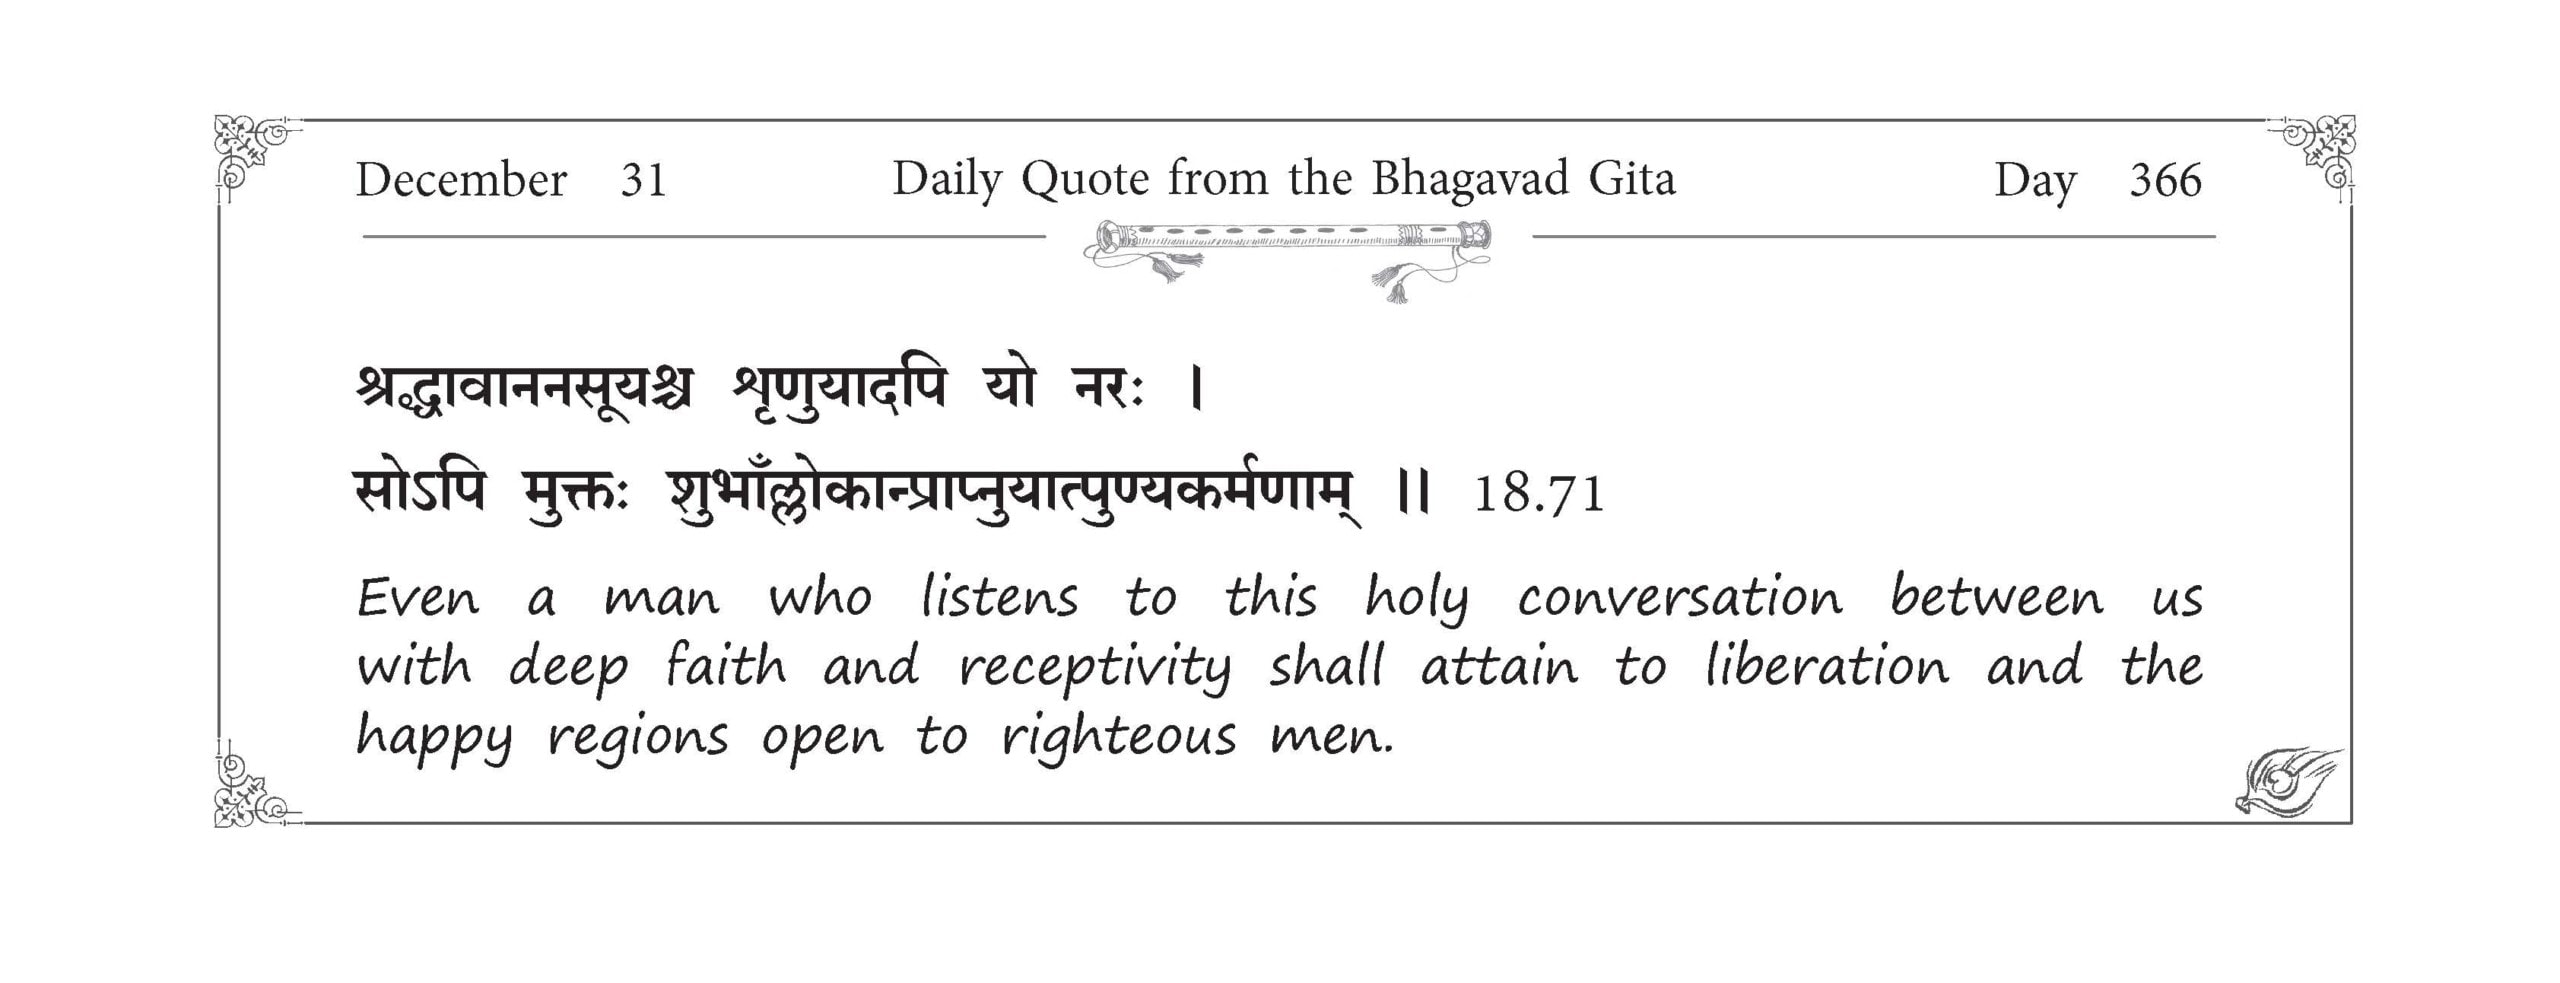 Celestial Chimes - Daily Quote from the Bhagavad Gita